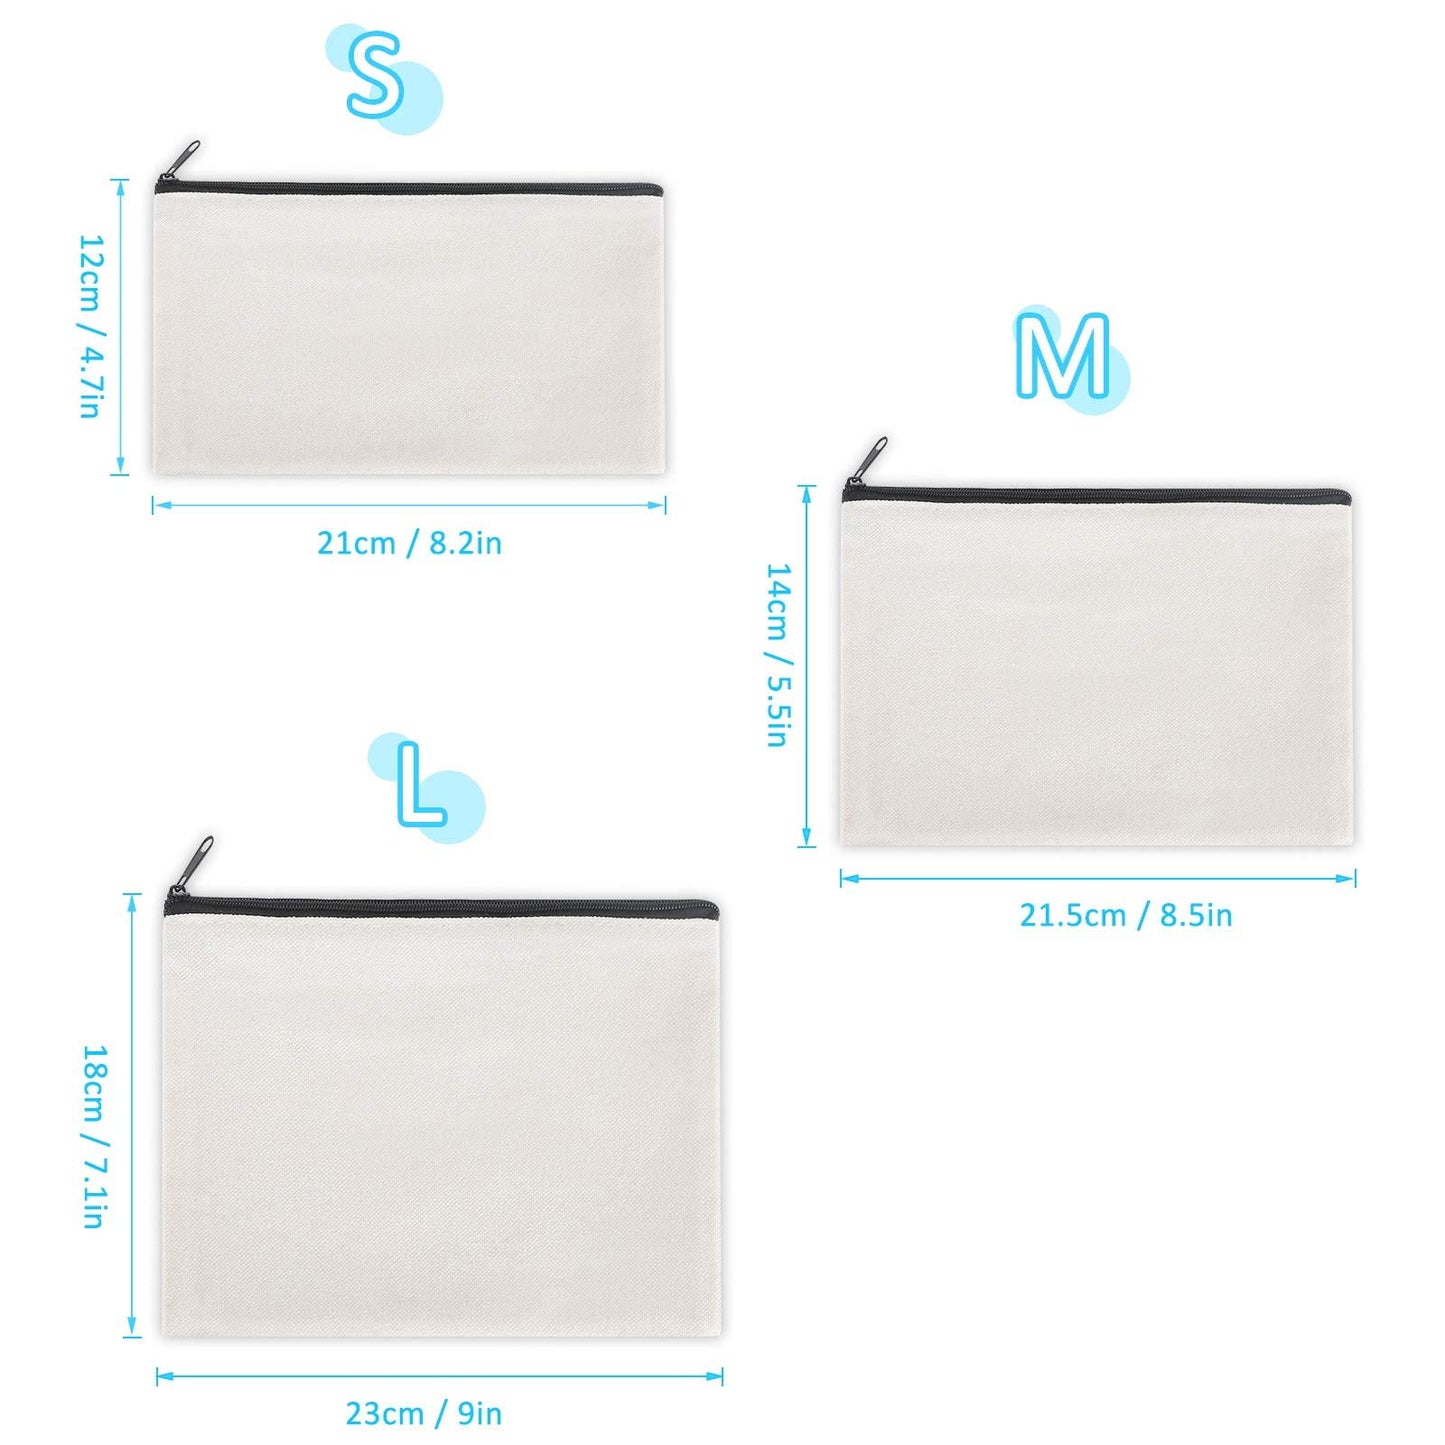 Sinzip 12 Pieces White Cotton Canvas Makeup Bag, Multipurpose Cosmetic Bag with Zipper Travel Toiletry Pouch, Blank DIY Craft Bag (White, L)